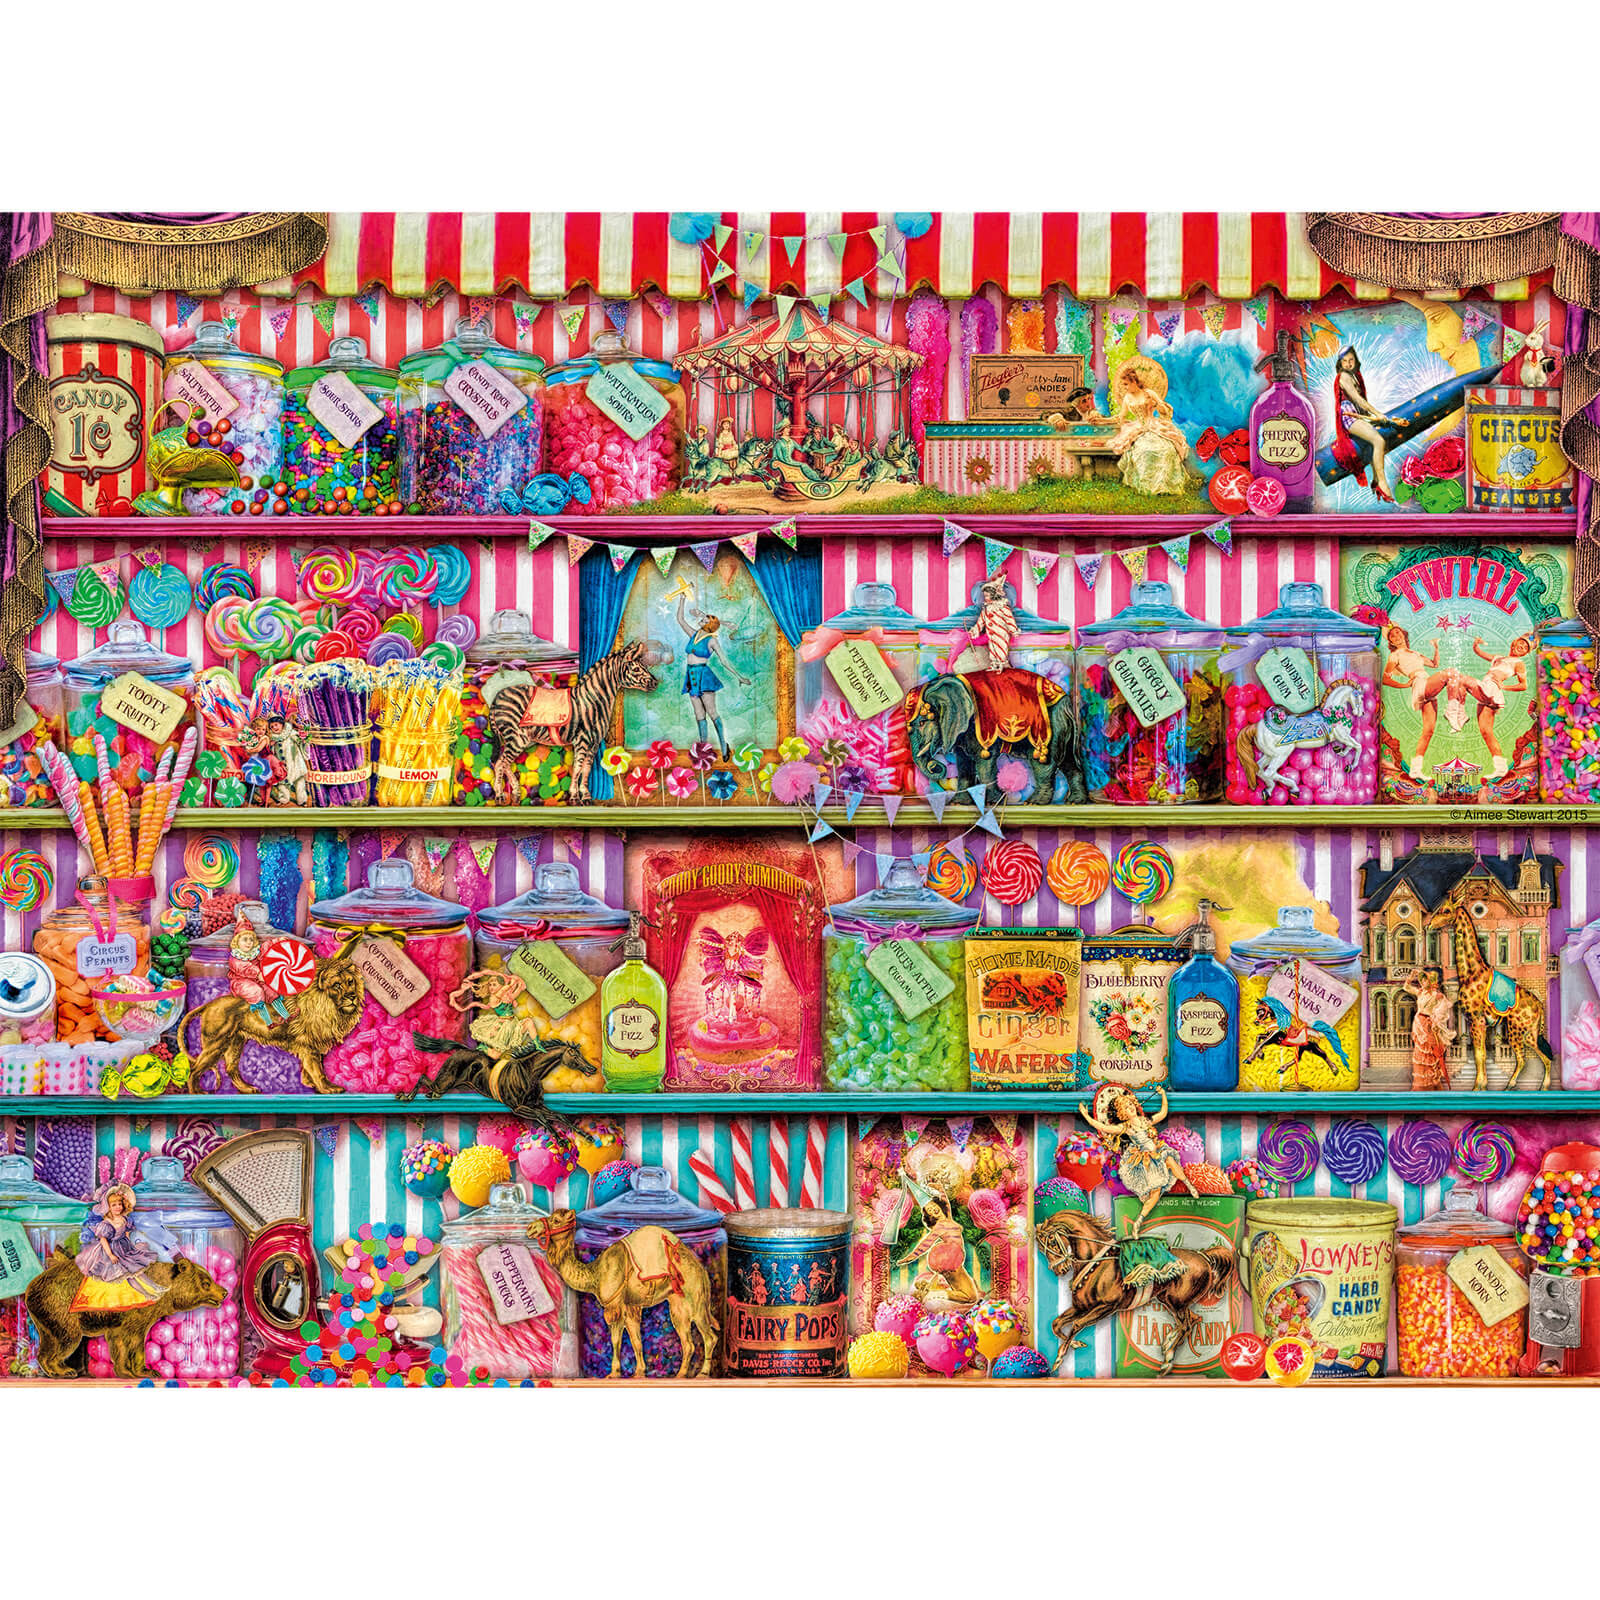 The Sweet Shop 500 piece jigsaw puzzle